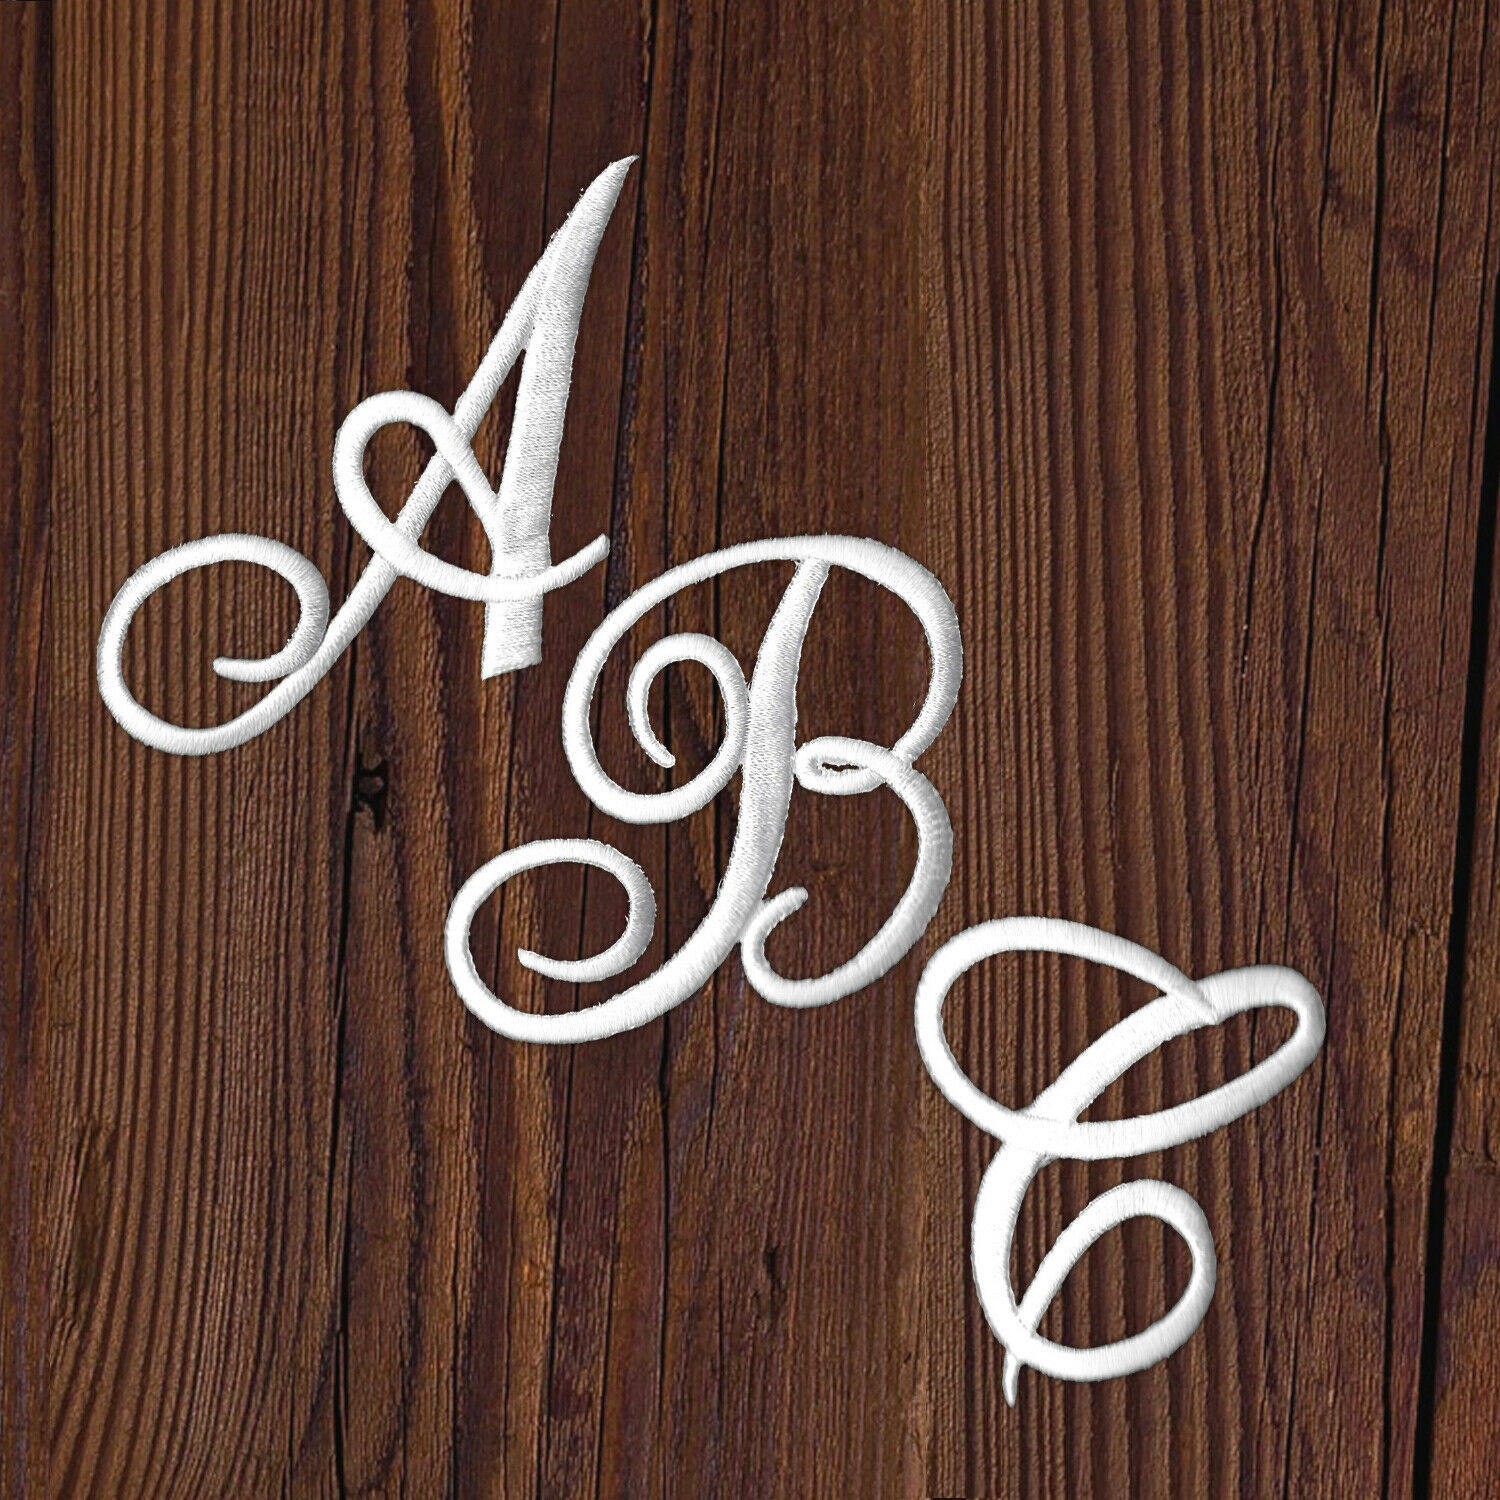 Monogram Iron On Letter Patches, Script Embroidered Letters, 3 Colors USA Seller